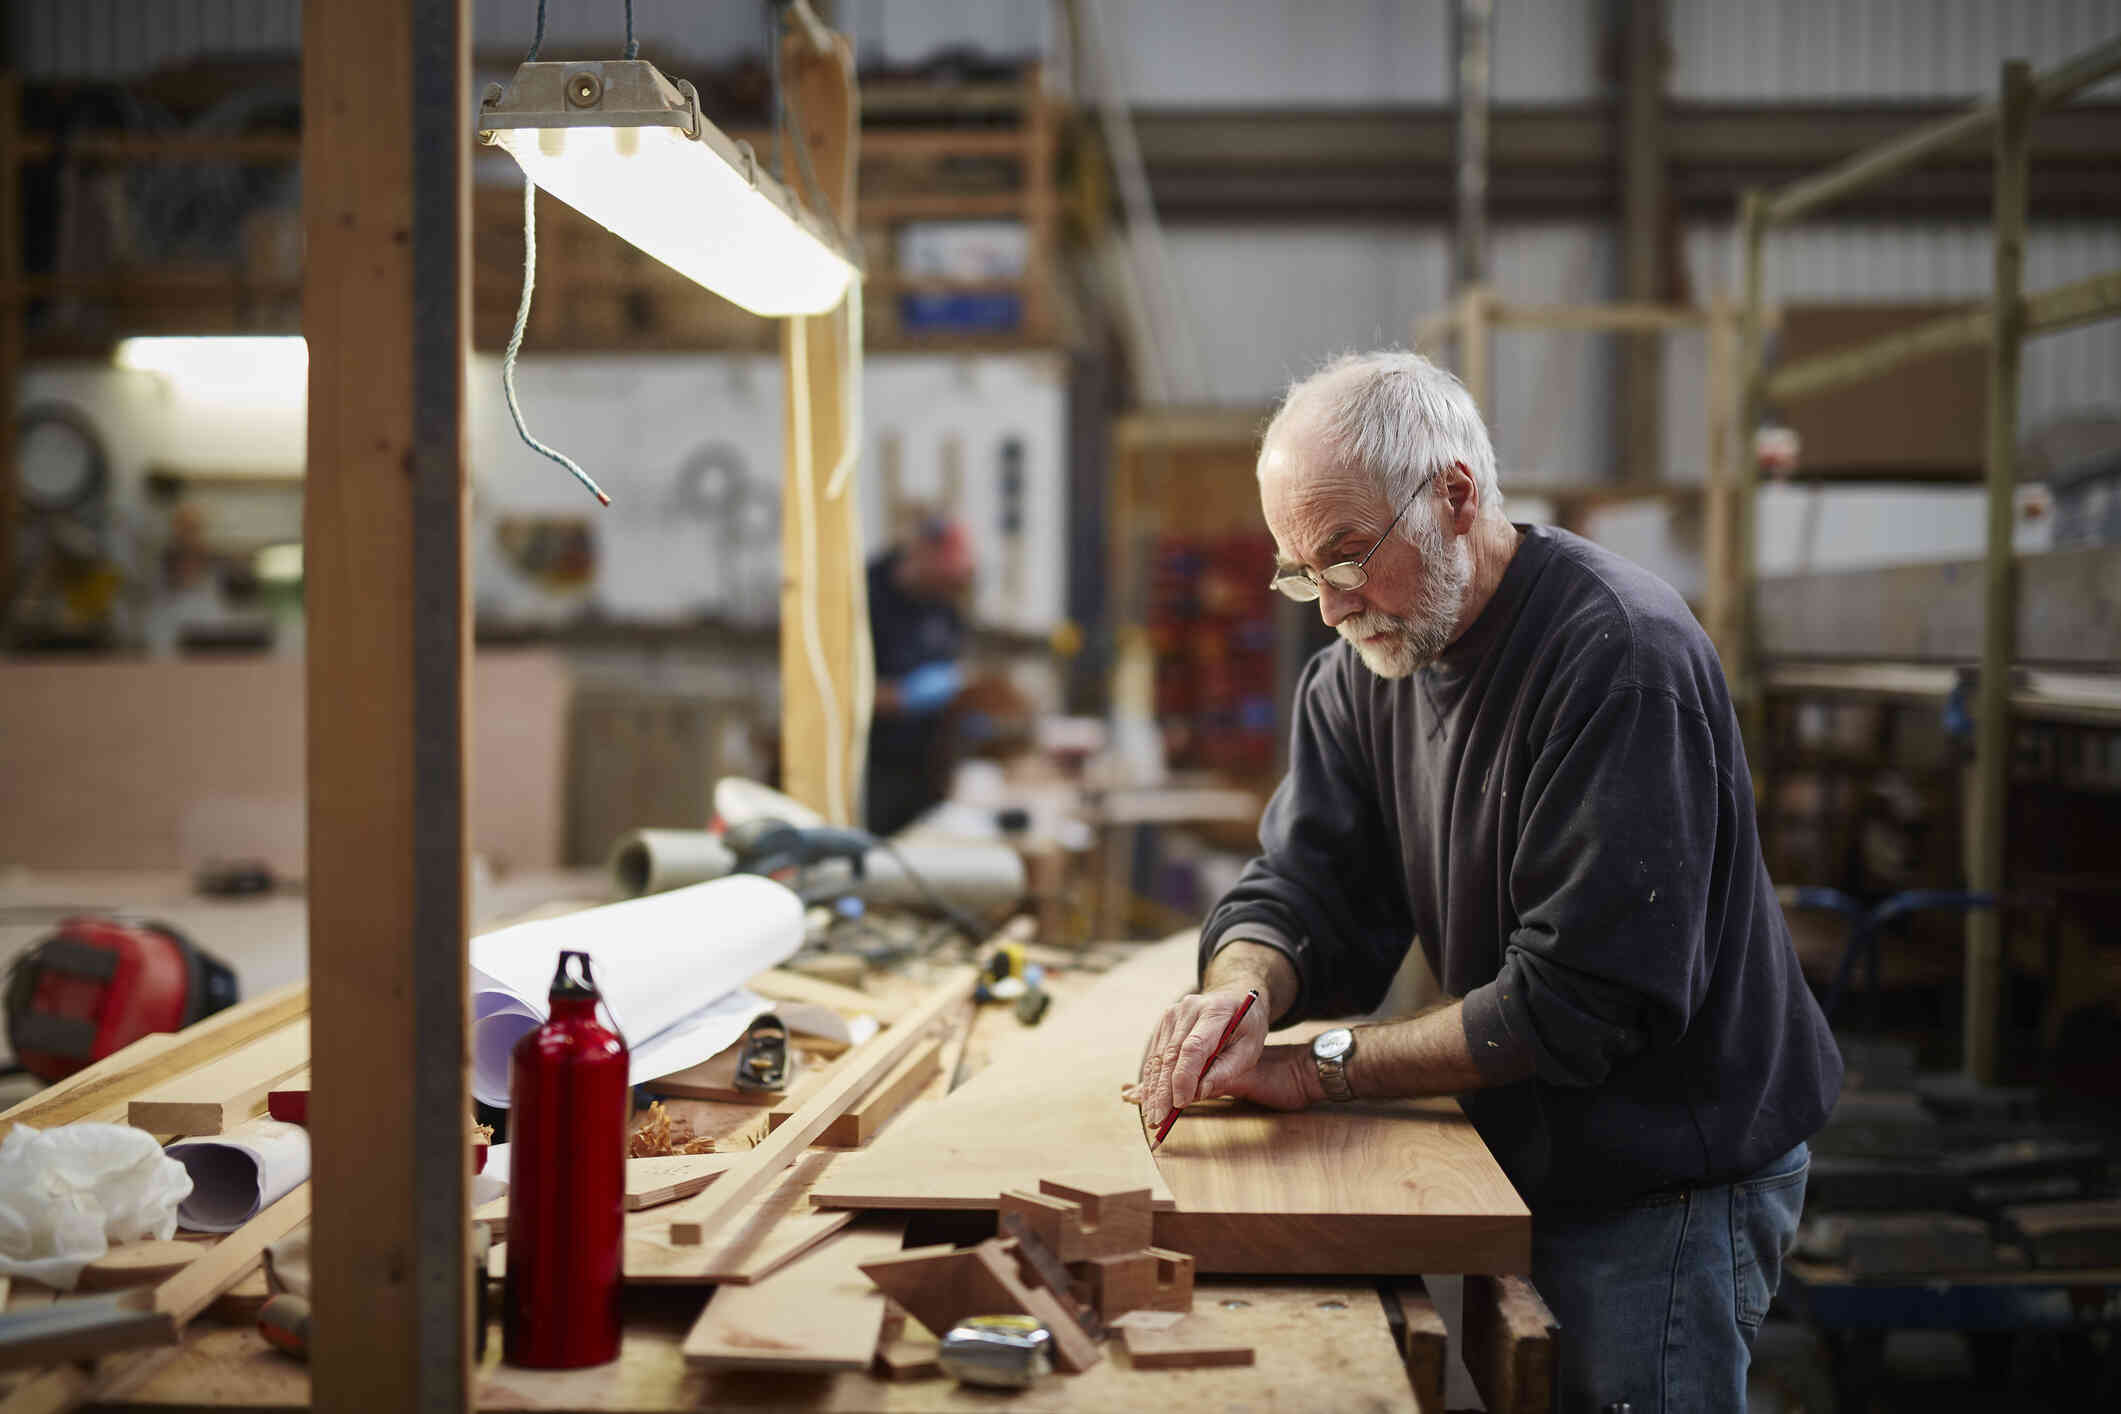 A mature man stands in his workshop and works art a wood crafting project with a serious expression.